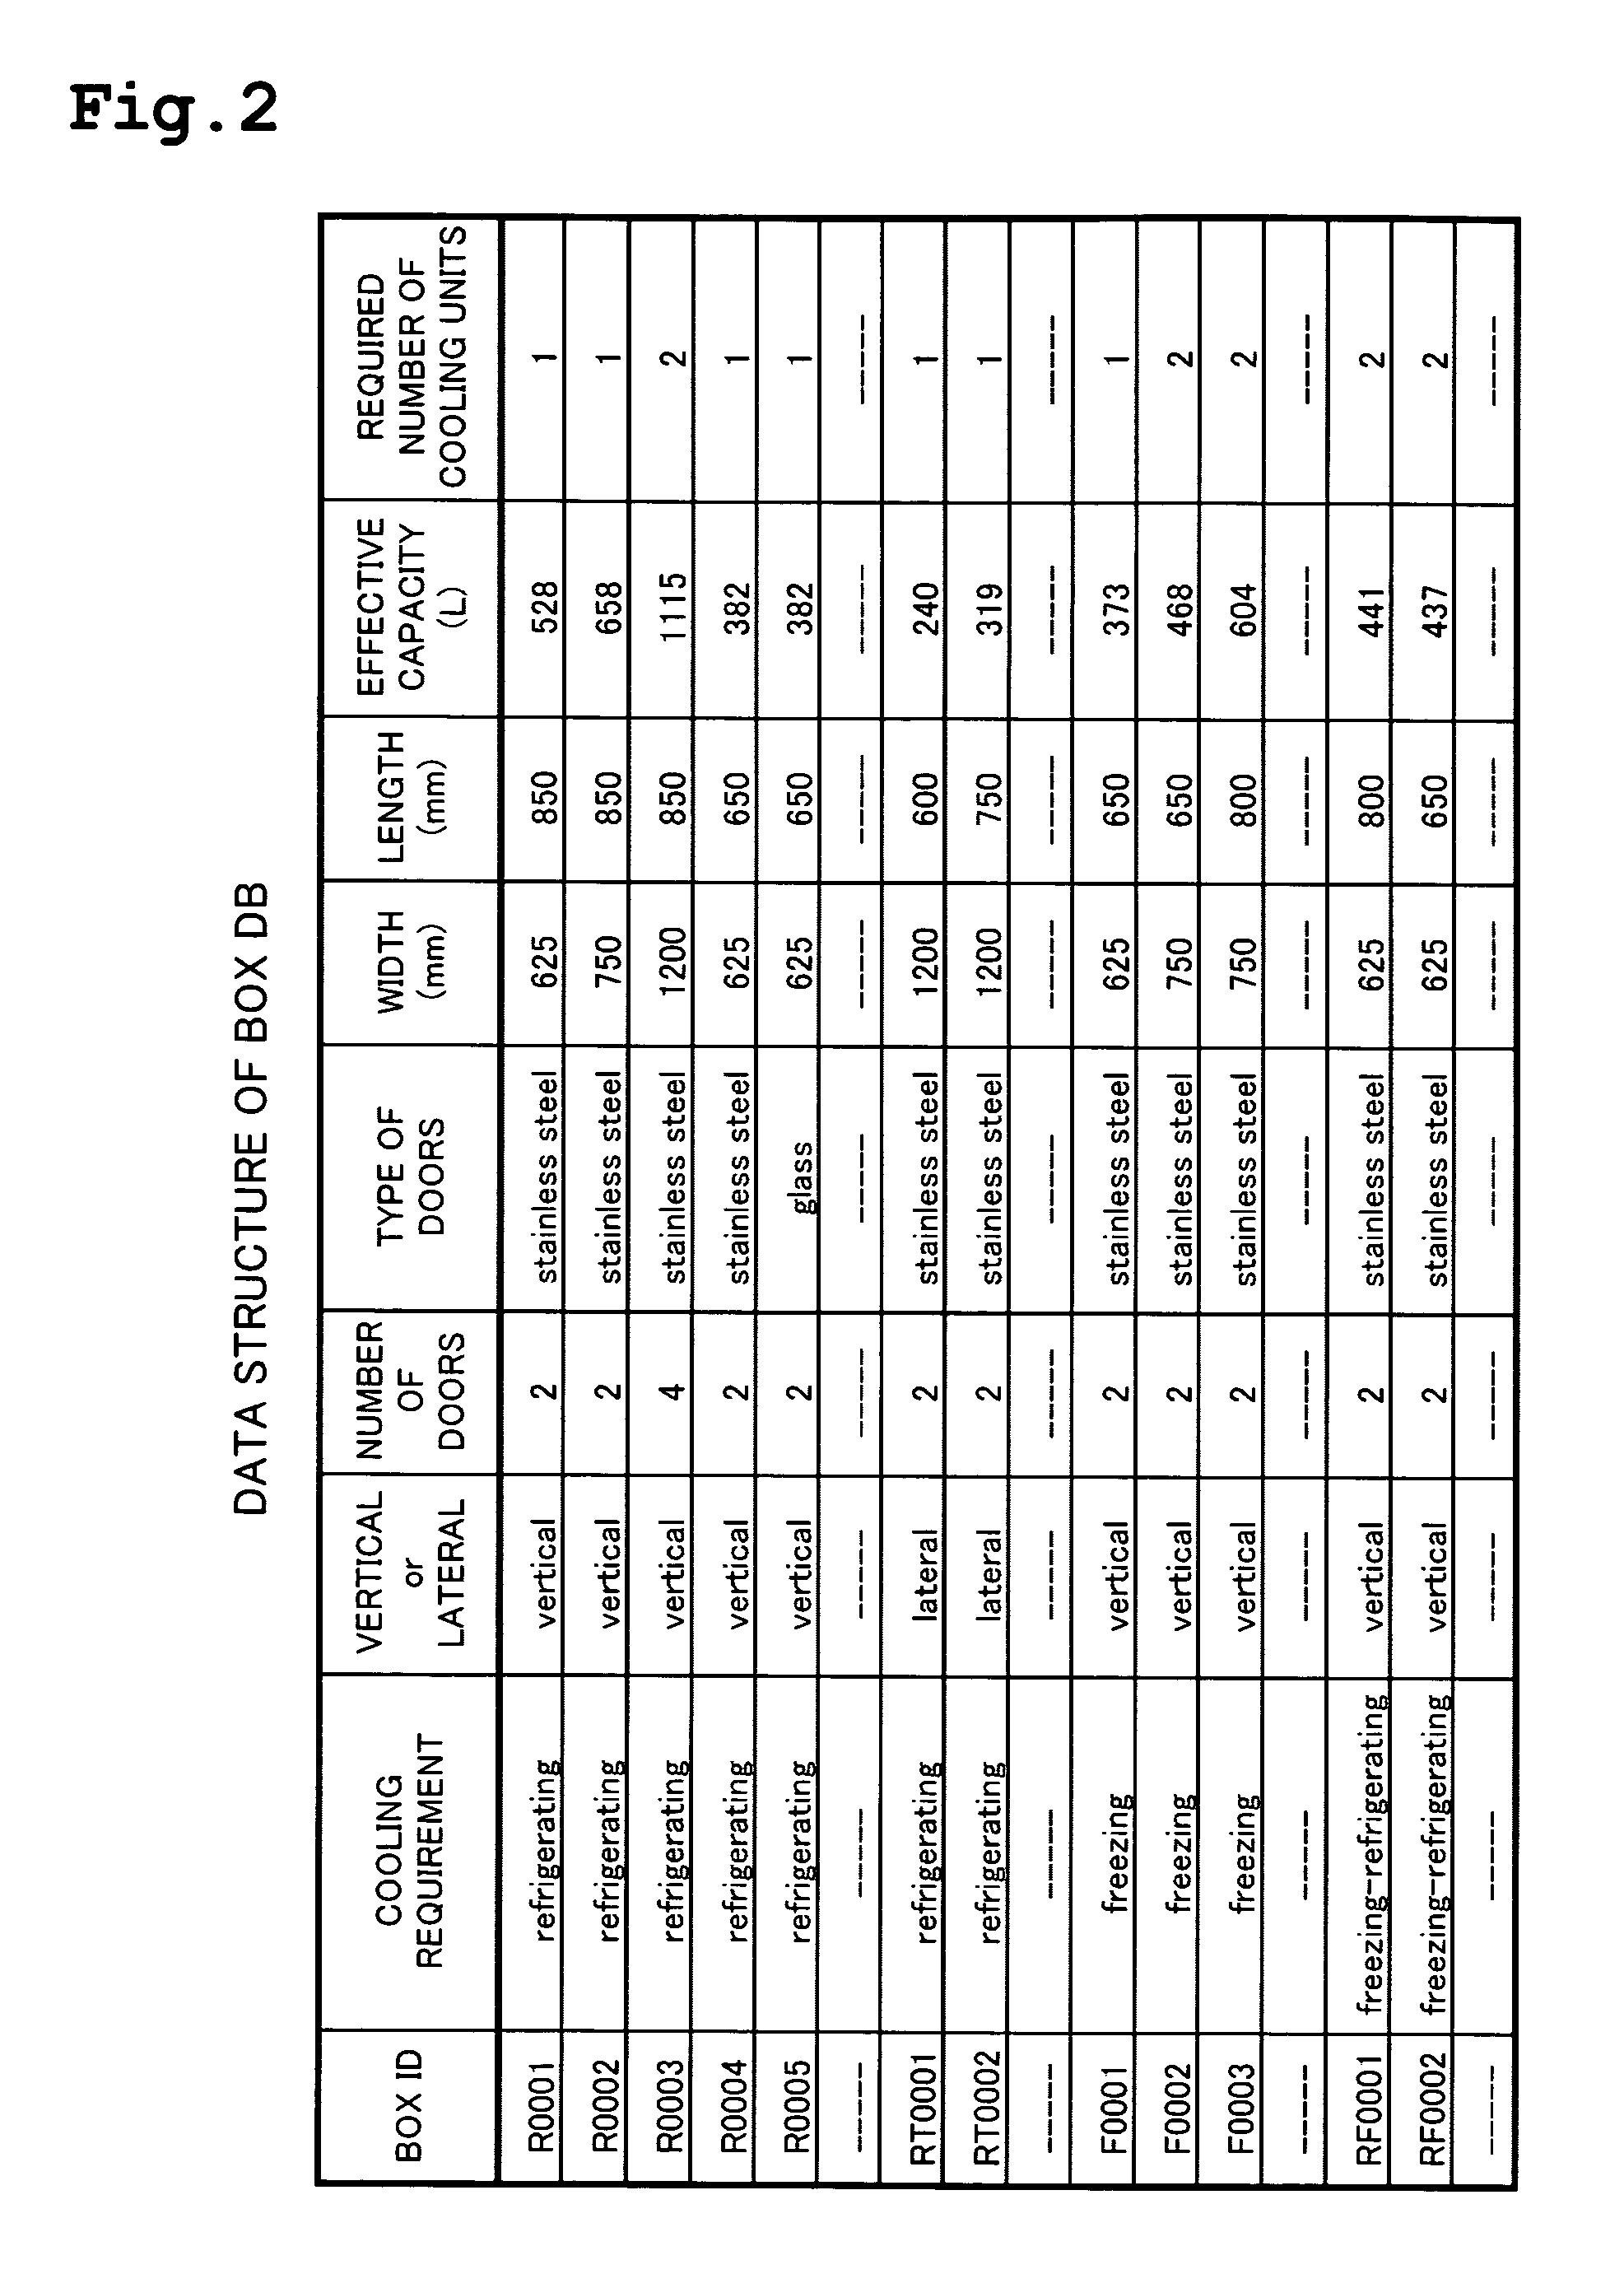 Method of manufacturing refrigerated repositories and sales management system for refrigerated storage